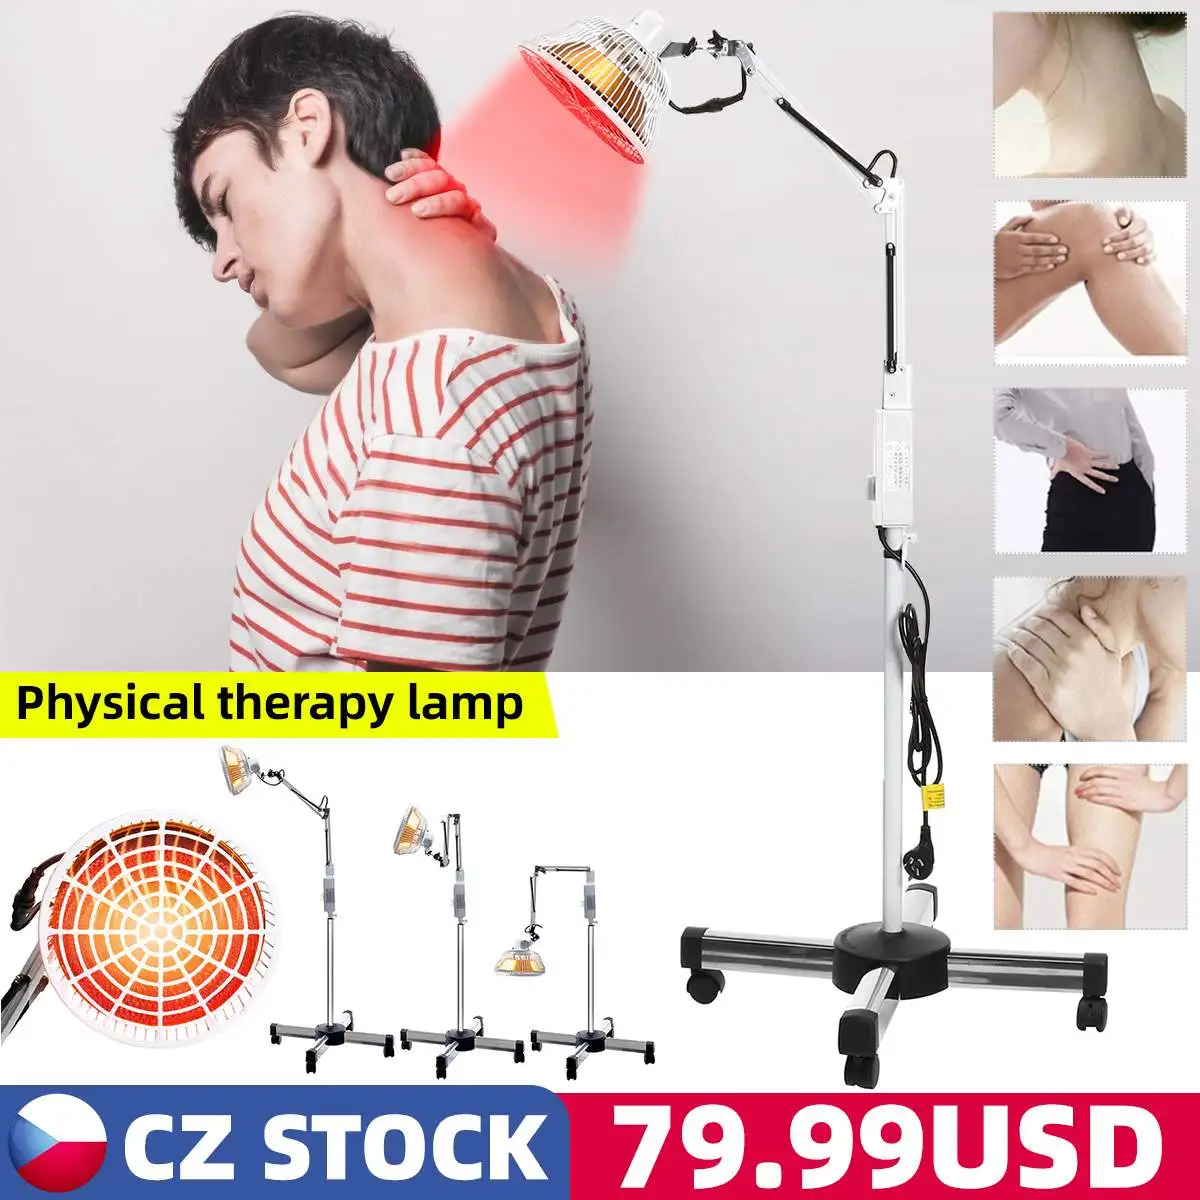 

250W TDP Far Infrared Heat Lamp Electromagnetic Wave Therapy Instrument Red Light Devices with Stand Pain Relief Heating Treatme